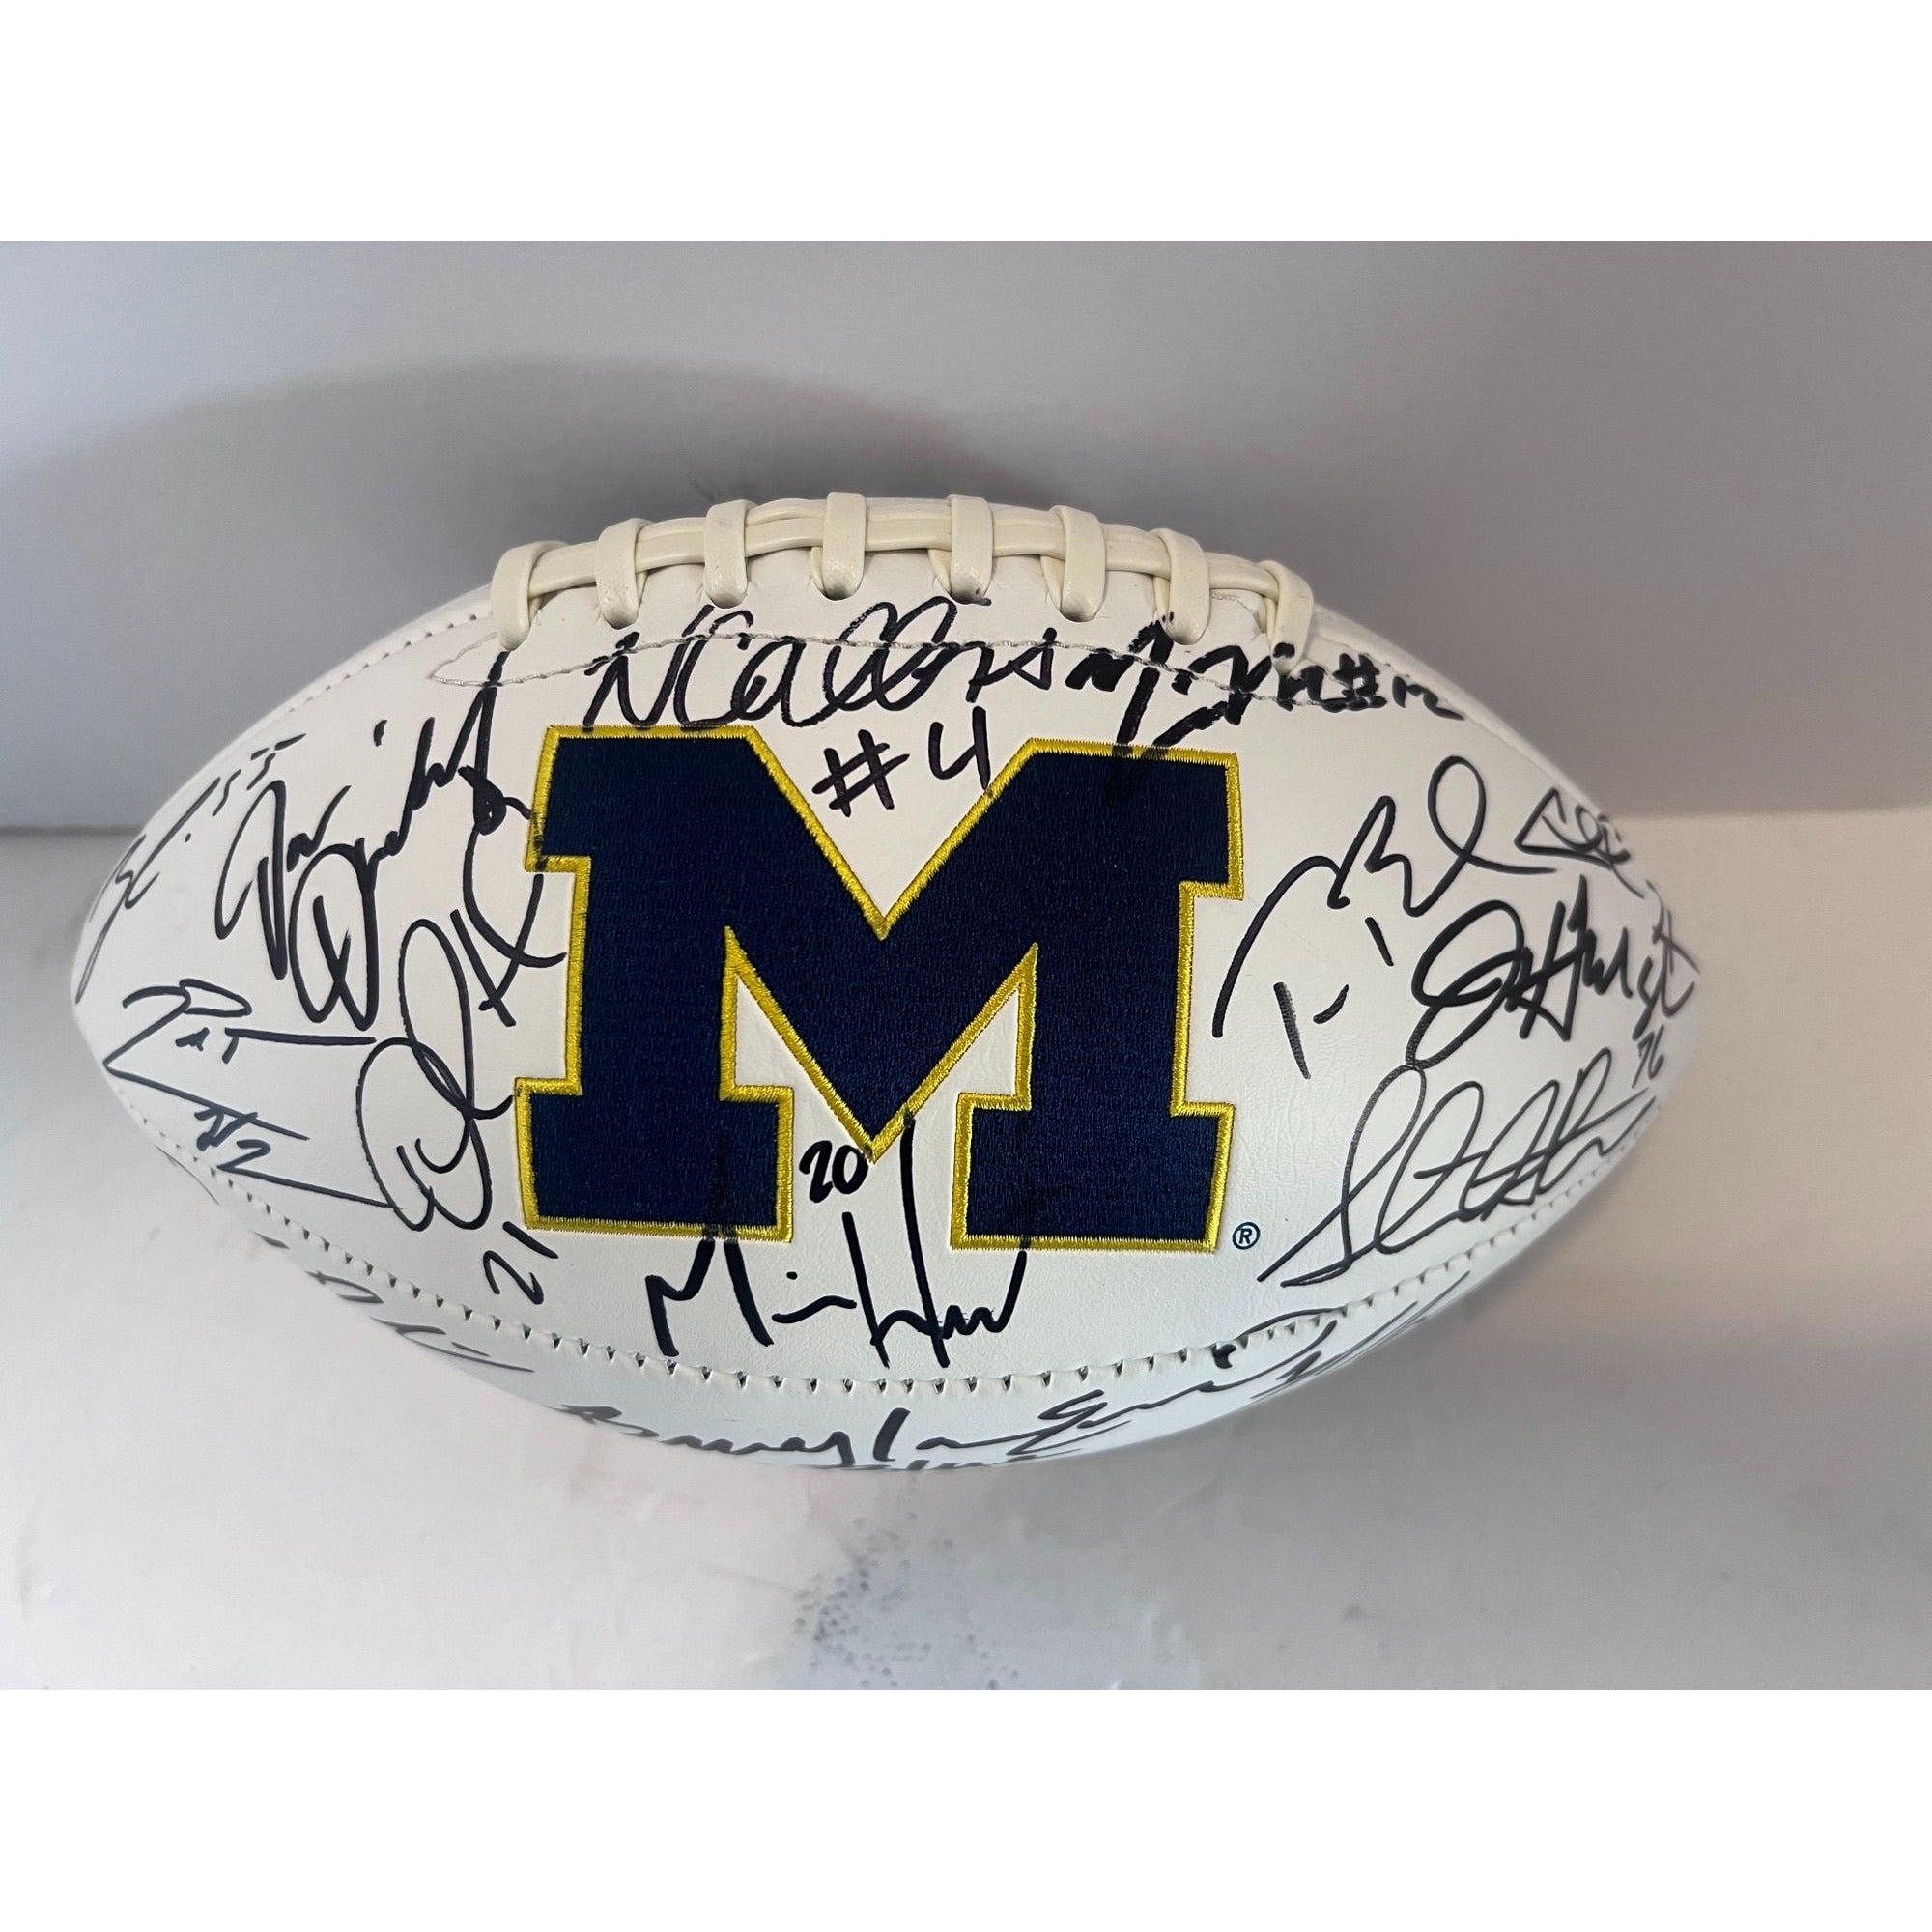 Michigan Legends Tom Brady, Charles Woodson, Desmond Howard, Jim Harbaugh signed football with proof free case